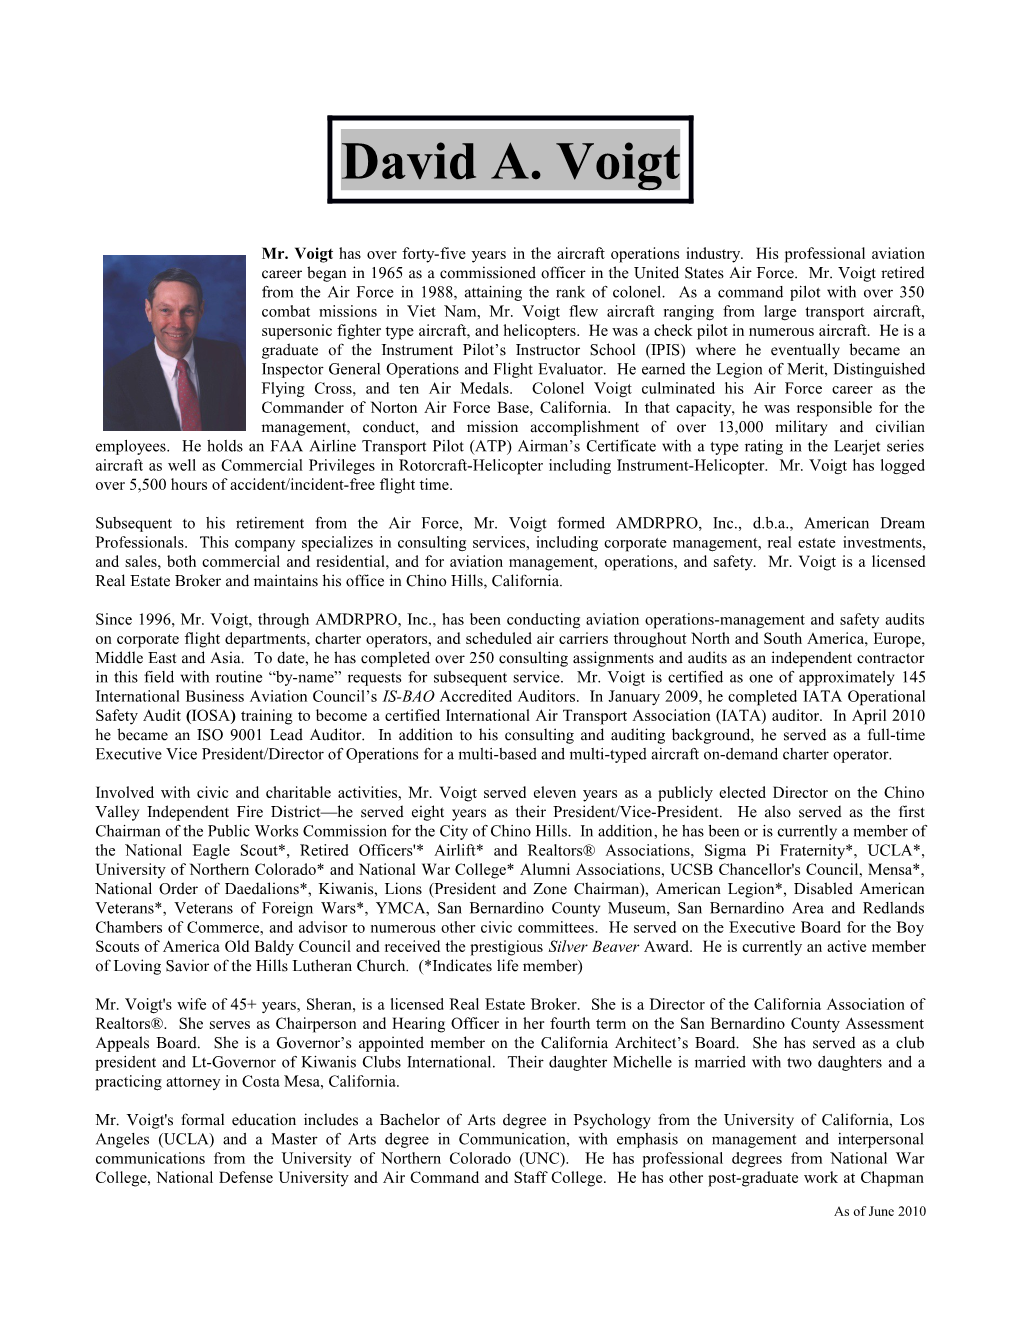 Mr. Voigt Has Over Forty-Five Years in the Aircraft Operations Industry. His Professional